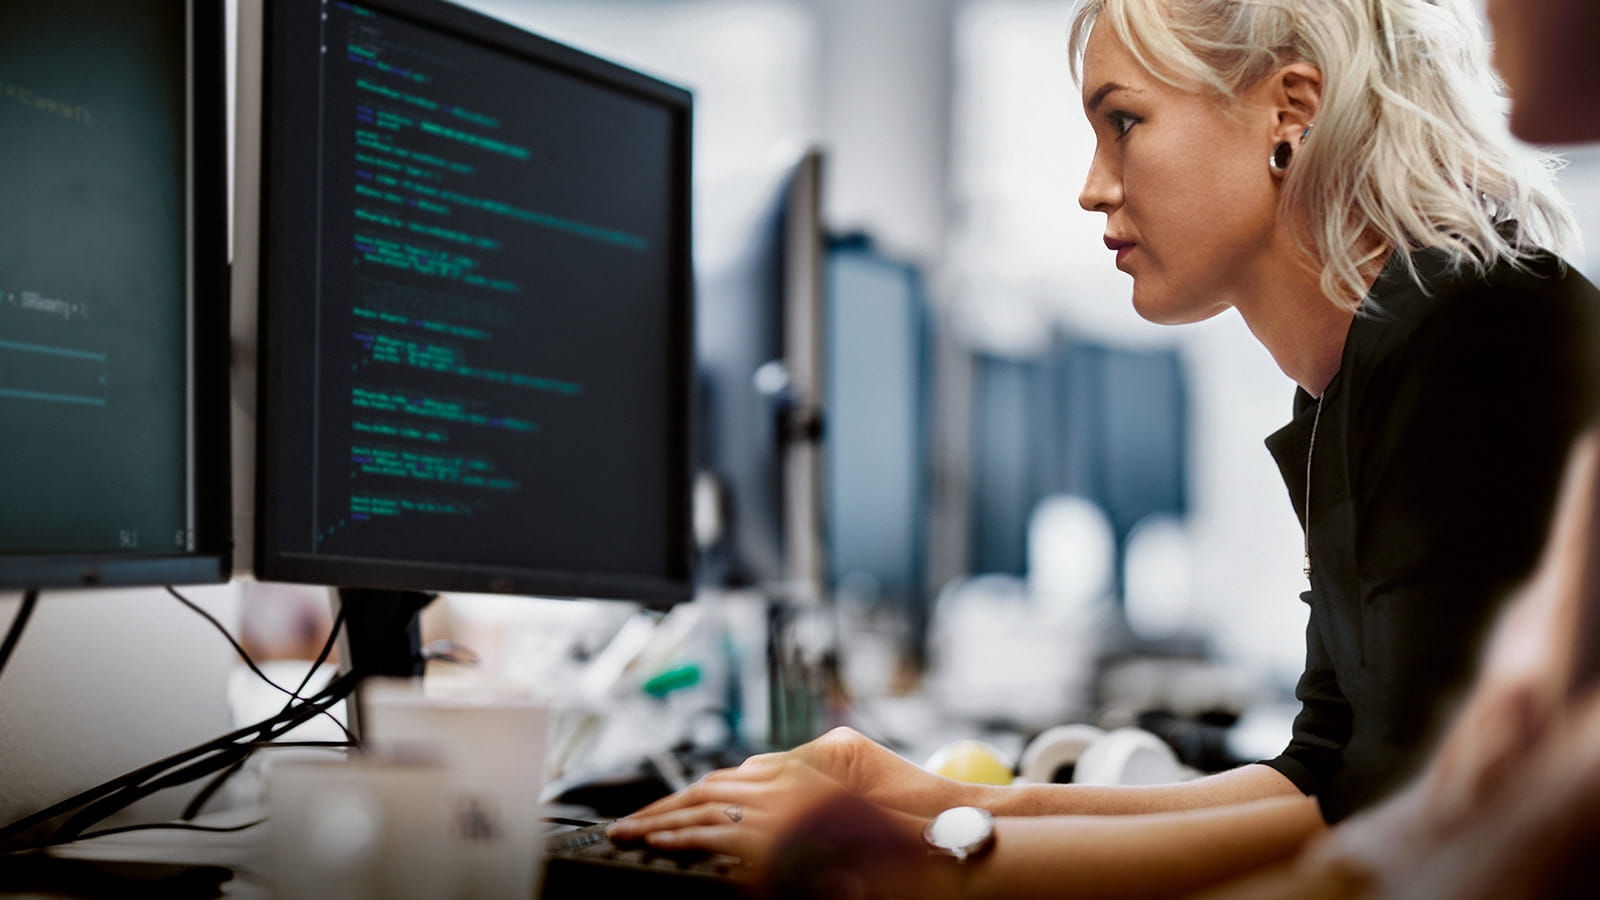 Woman at workstation with code on screen